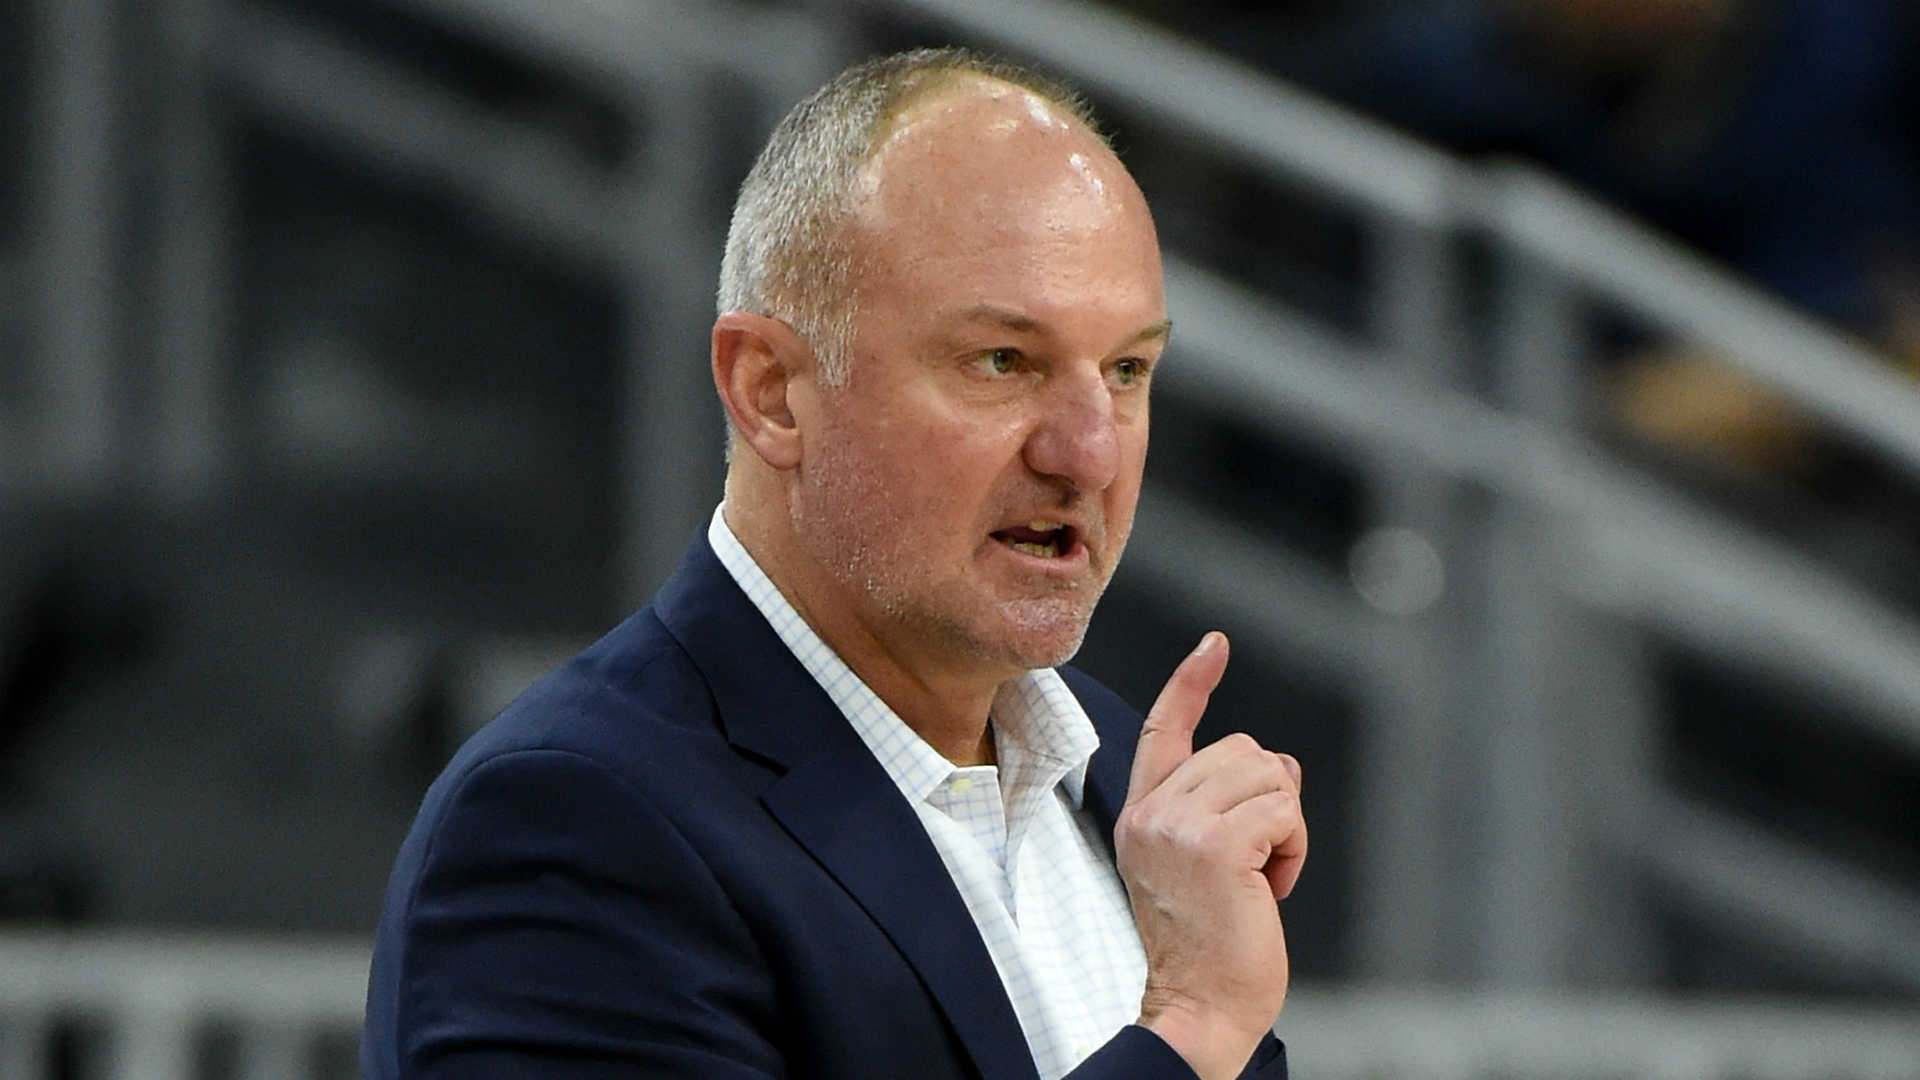 Thad Matta's firing makes it clear recruiting top priority for next